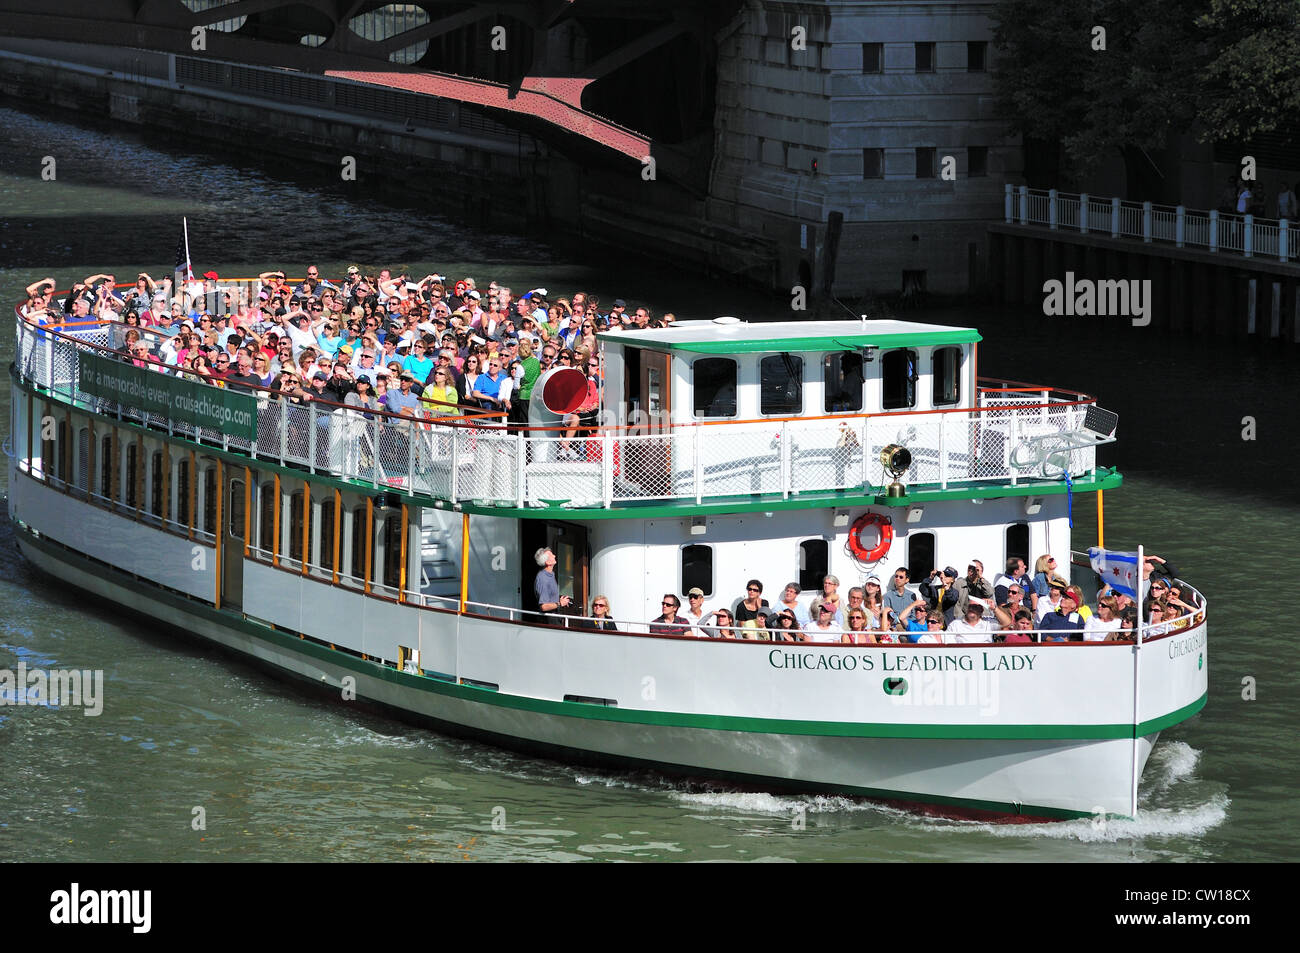 USA Illinois Chicago's Leading Lady cruises down the Chicago River with a full load of passengers. Stock Photo